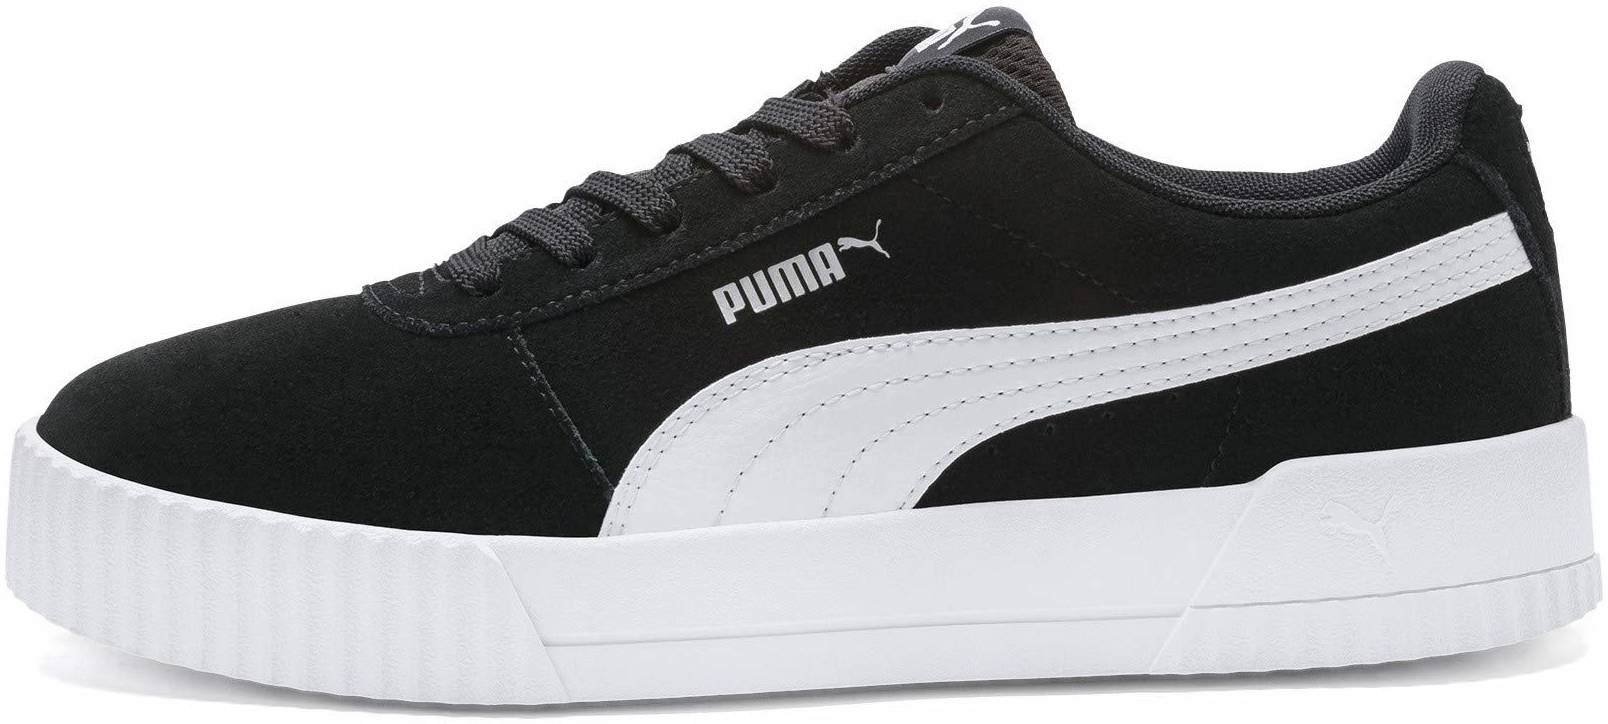 Only $39 + Review of Puma Carina 